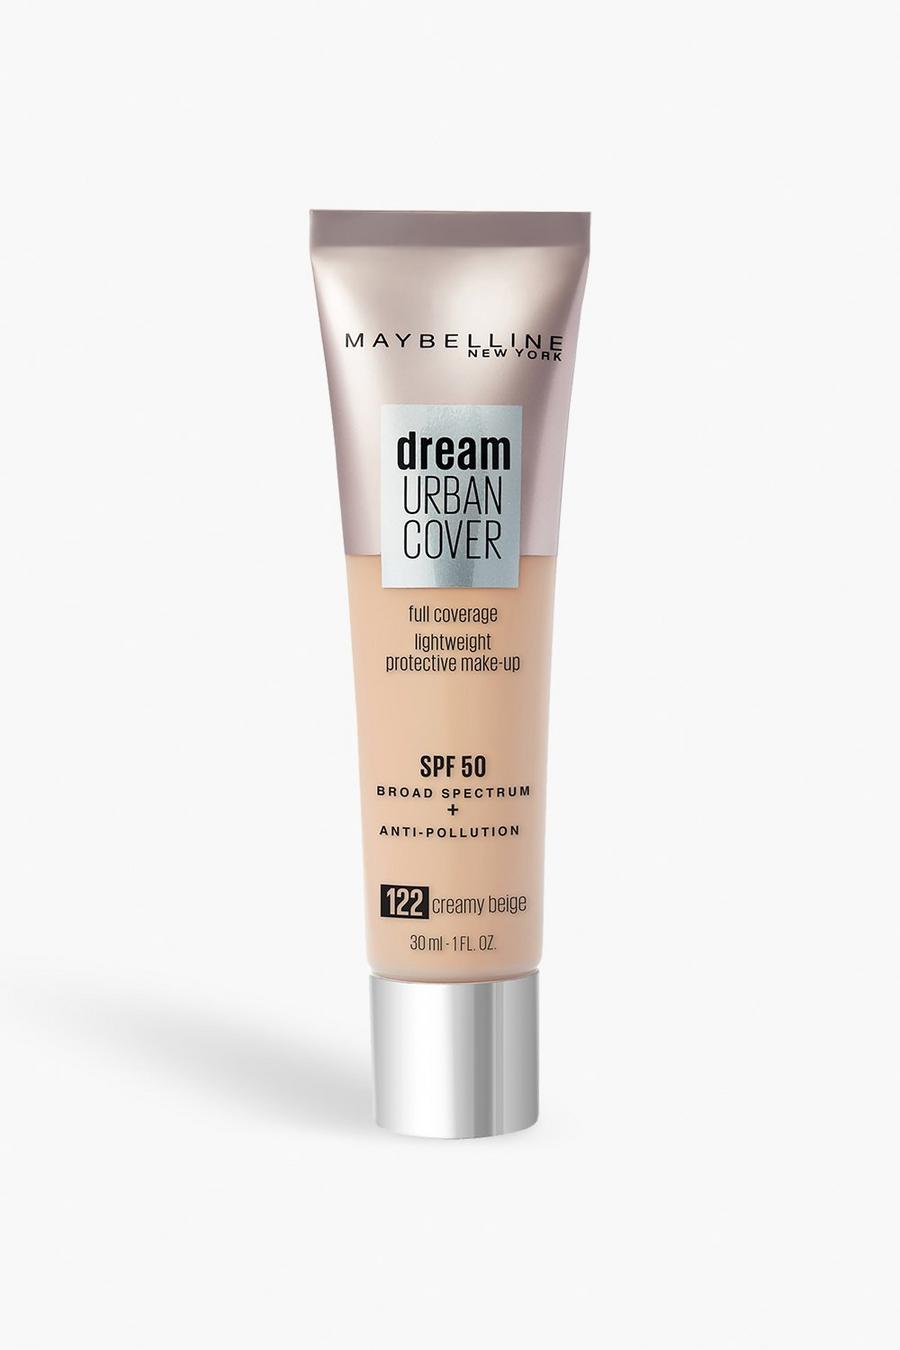 Maybelline Dream Urban Cover All-In-One Protective Foundation SPF 50 - 122 Creamy Beige image number 1